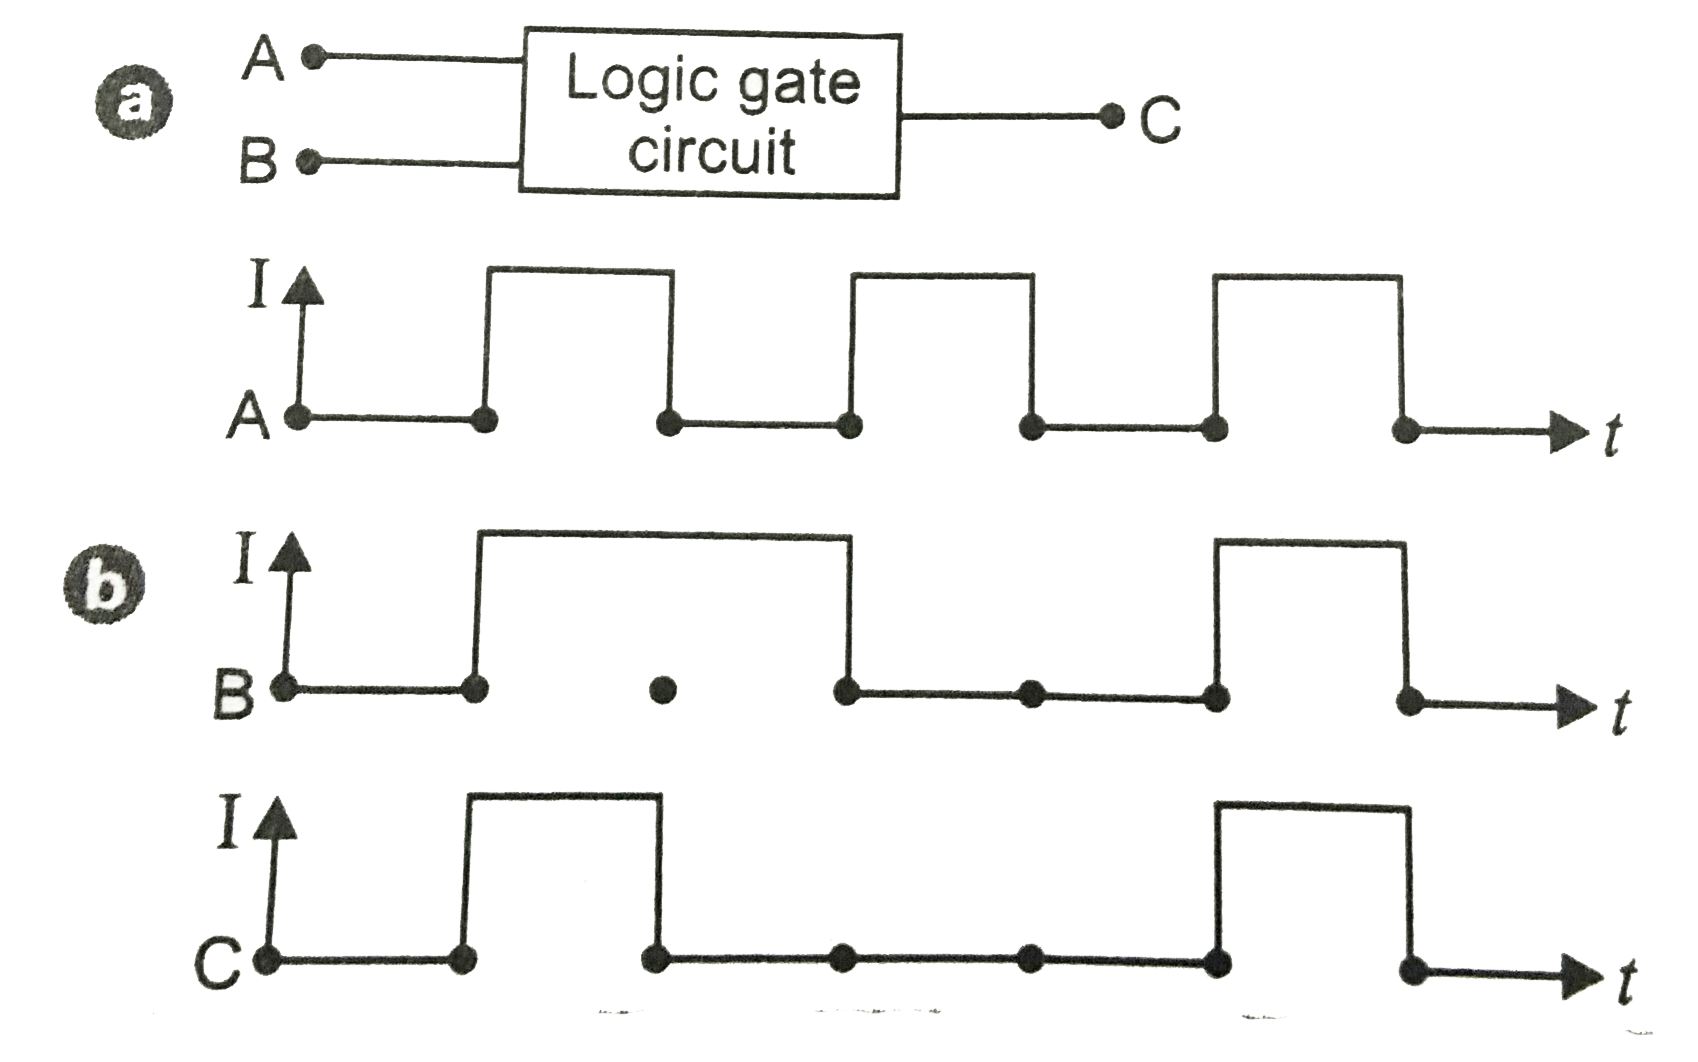 The Fig.shows a logic gate circuit with two inputs A and B and the output C are as shown in Fig.